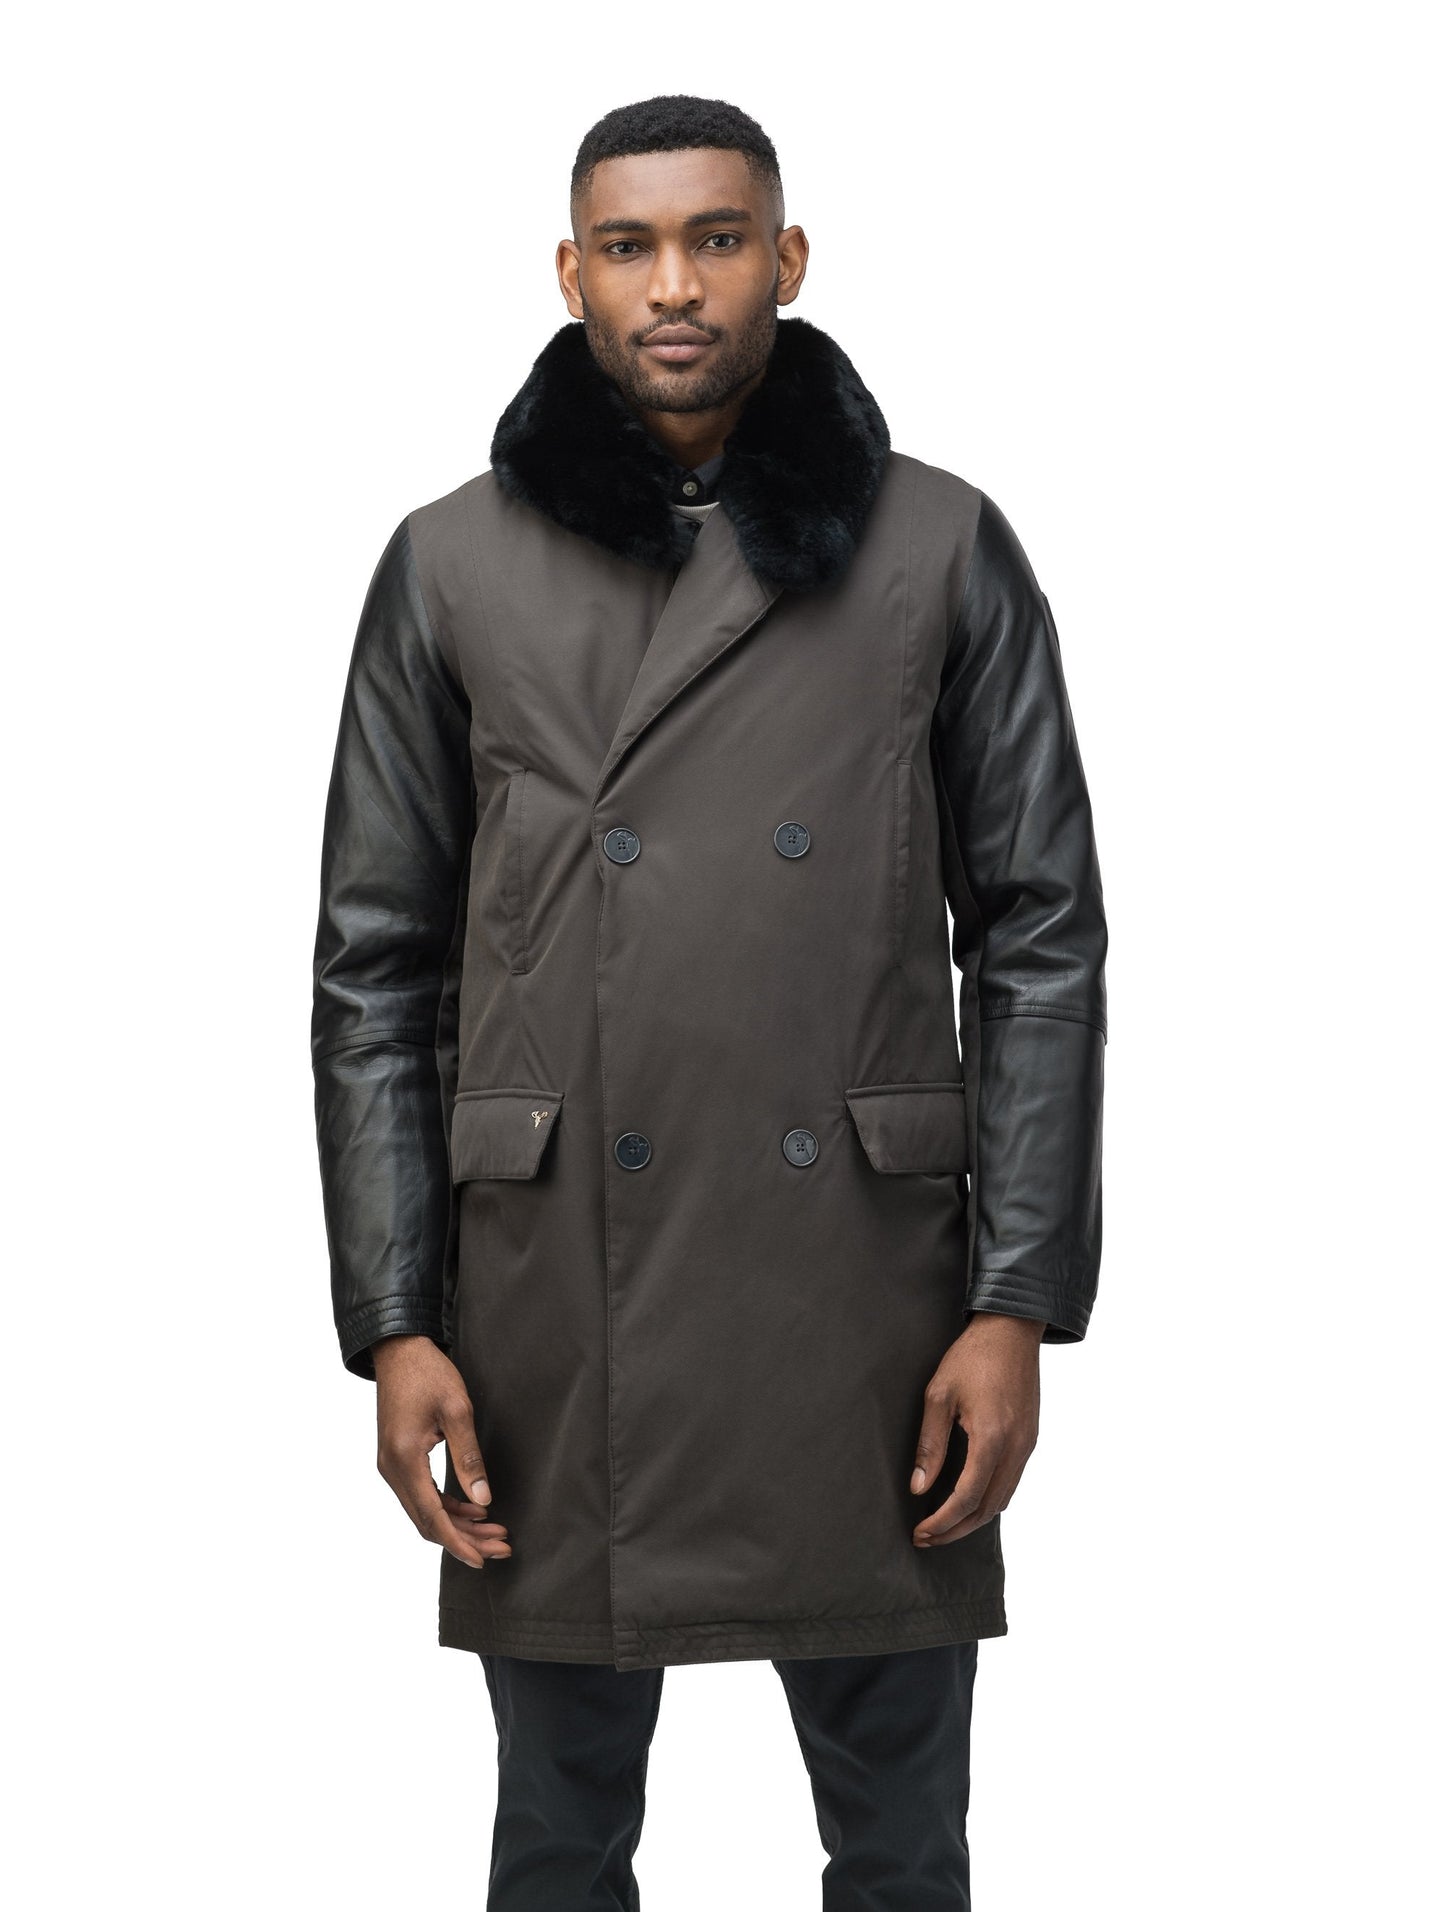 Men's down filled coat with machine washable leather sleeves, removable liner, and Rex Rabbit fur ruff in Brown